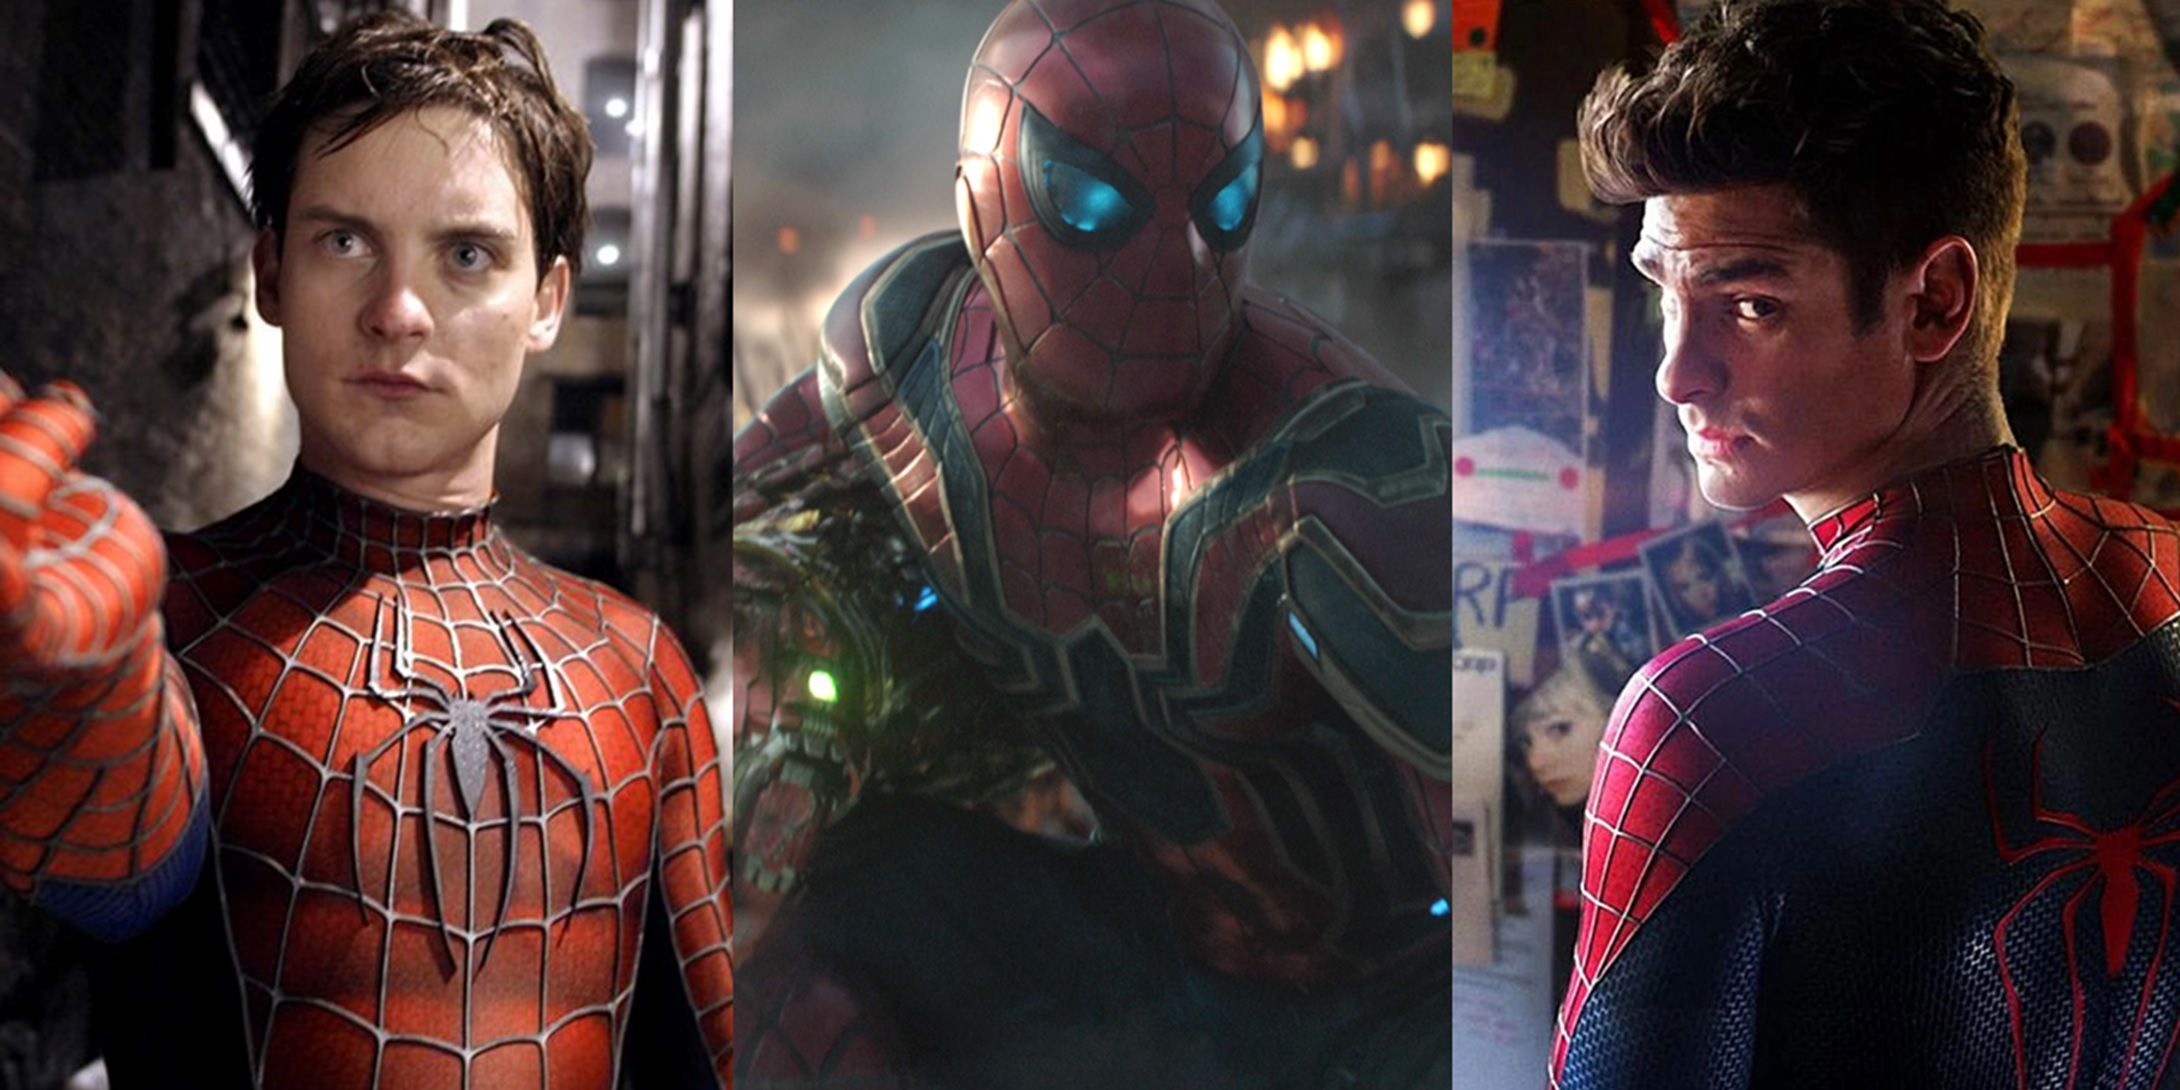 Split image of Tobey Maguire in Spider-Man 2, Tom Holland in Avengers Endgame, and Andrew Garfield in The Amazing Spider-Man 2